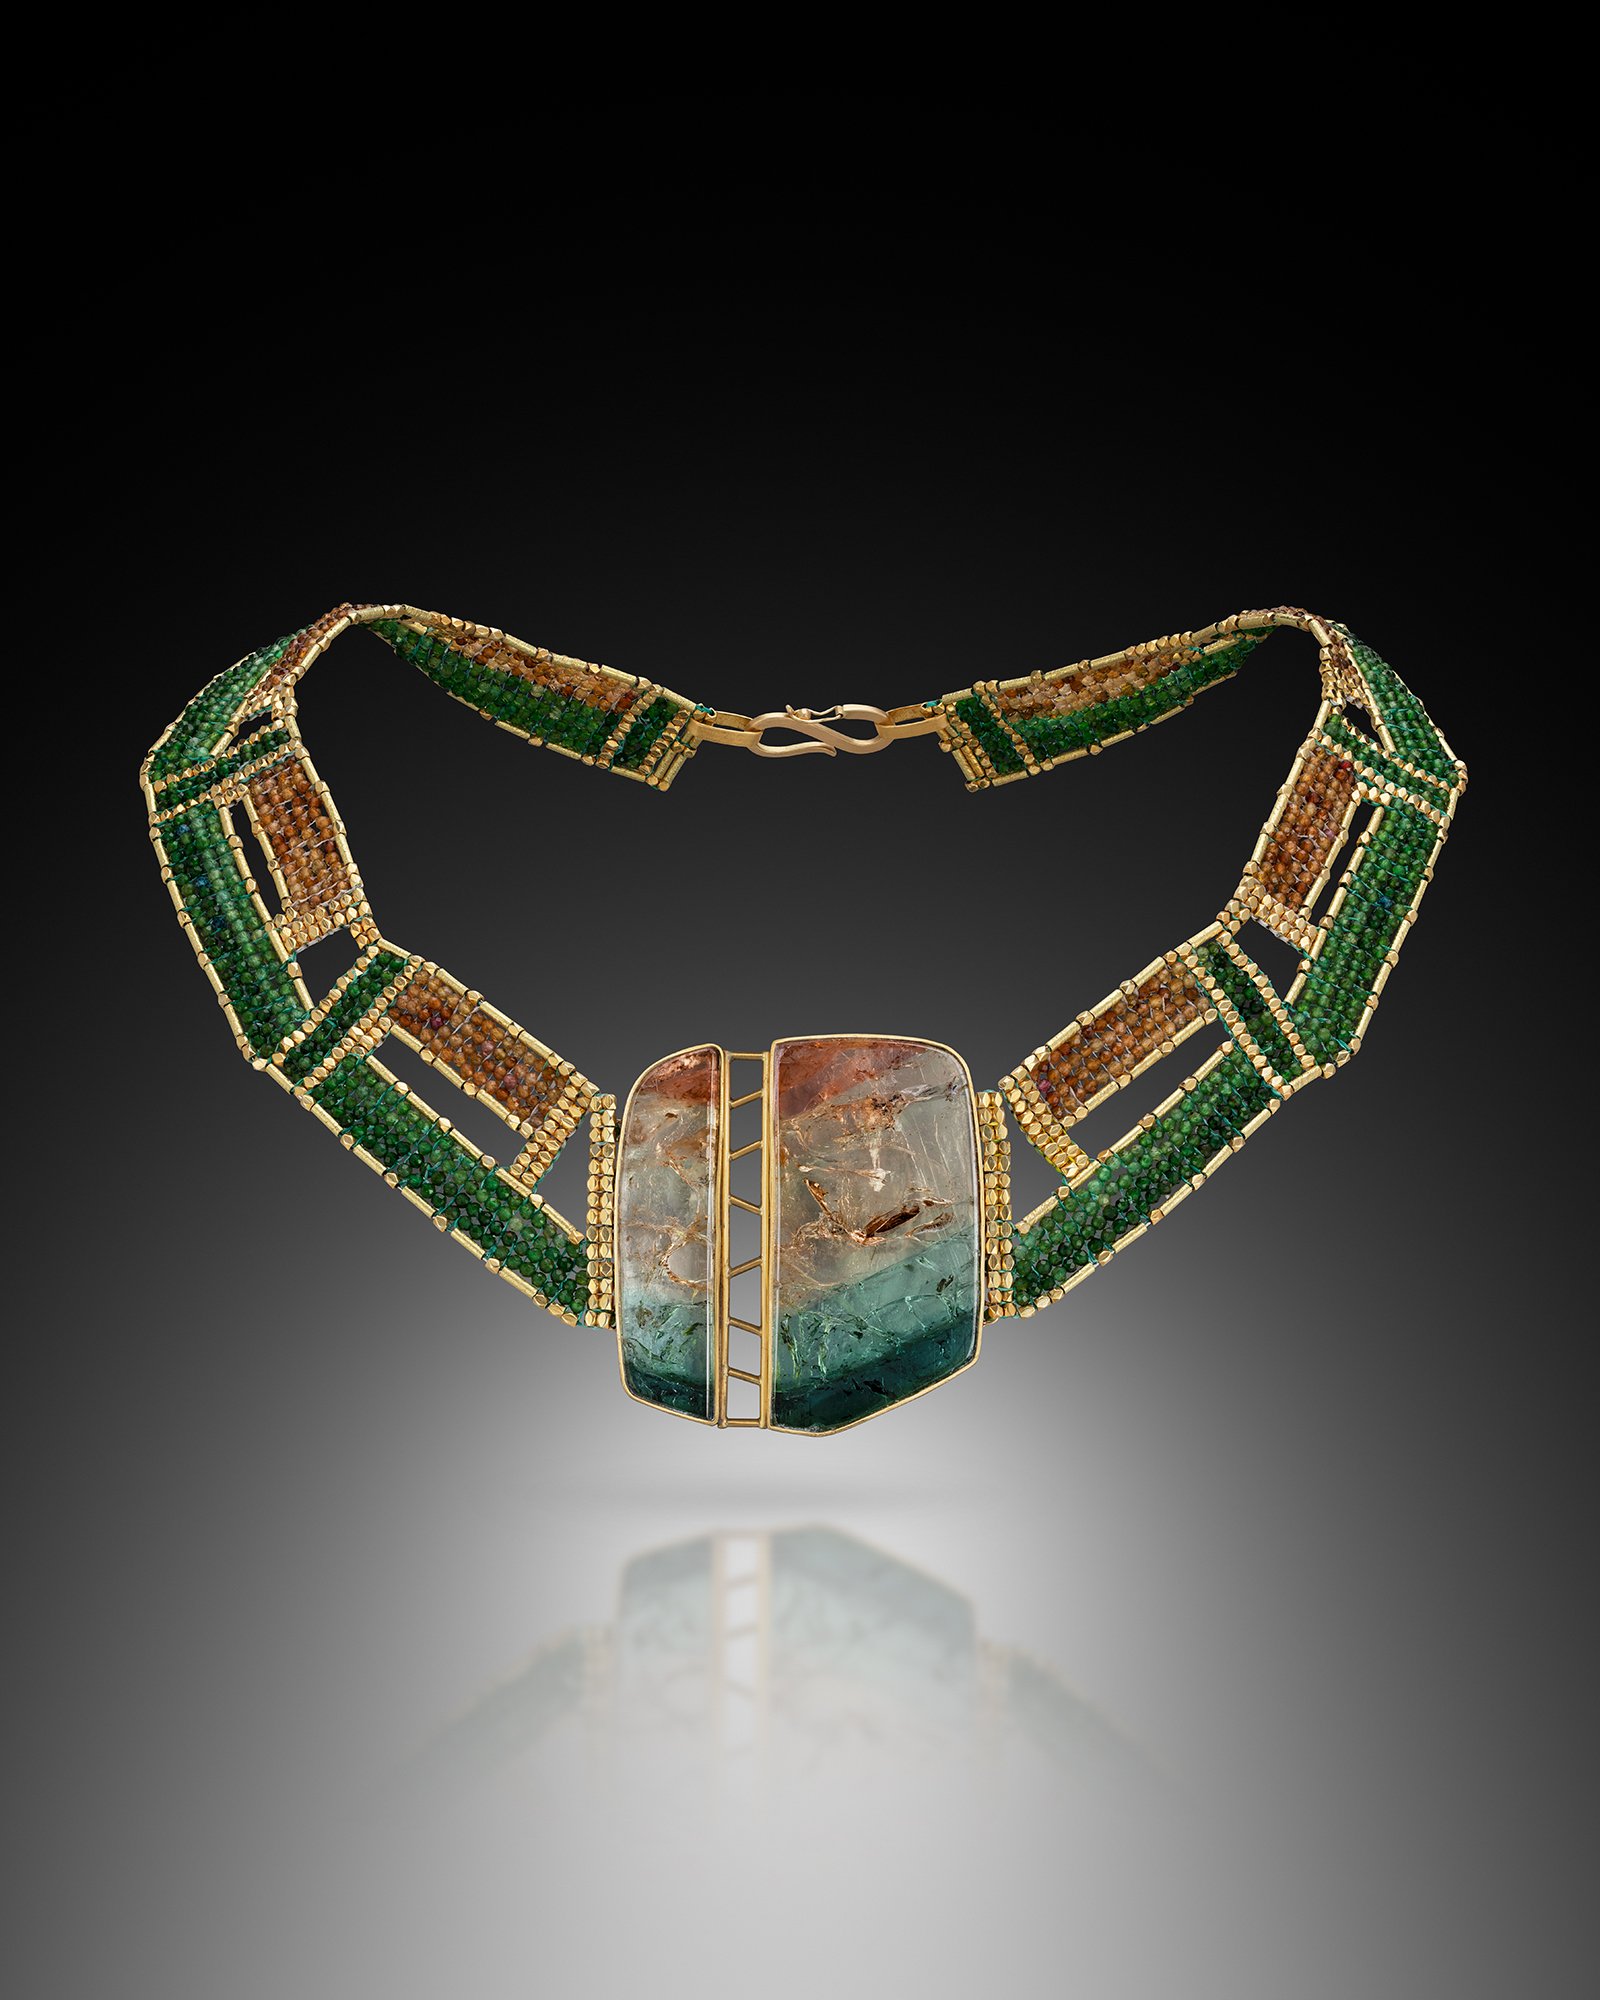 Landcape (2). This multicolor tourmaline collar is hand woven of tourmaline, and   20k gold beads.  The large, 2-part, tourmaline slice is set in a hand fabricated bezel of 22k and 18k gold.